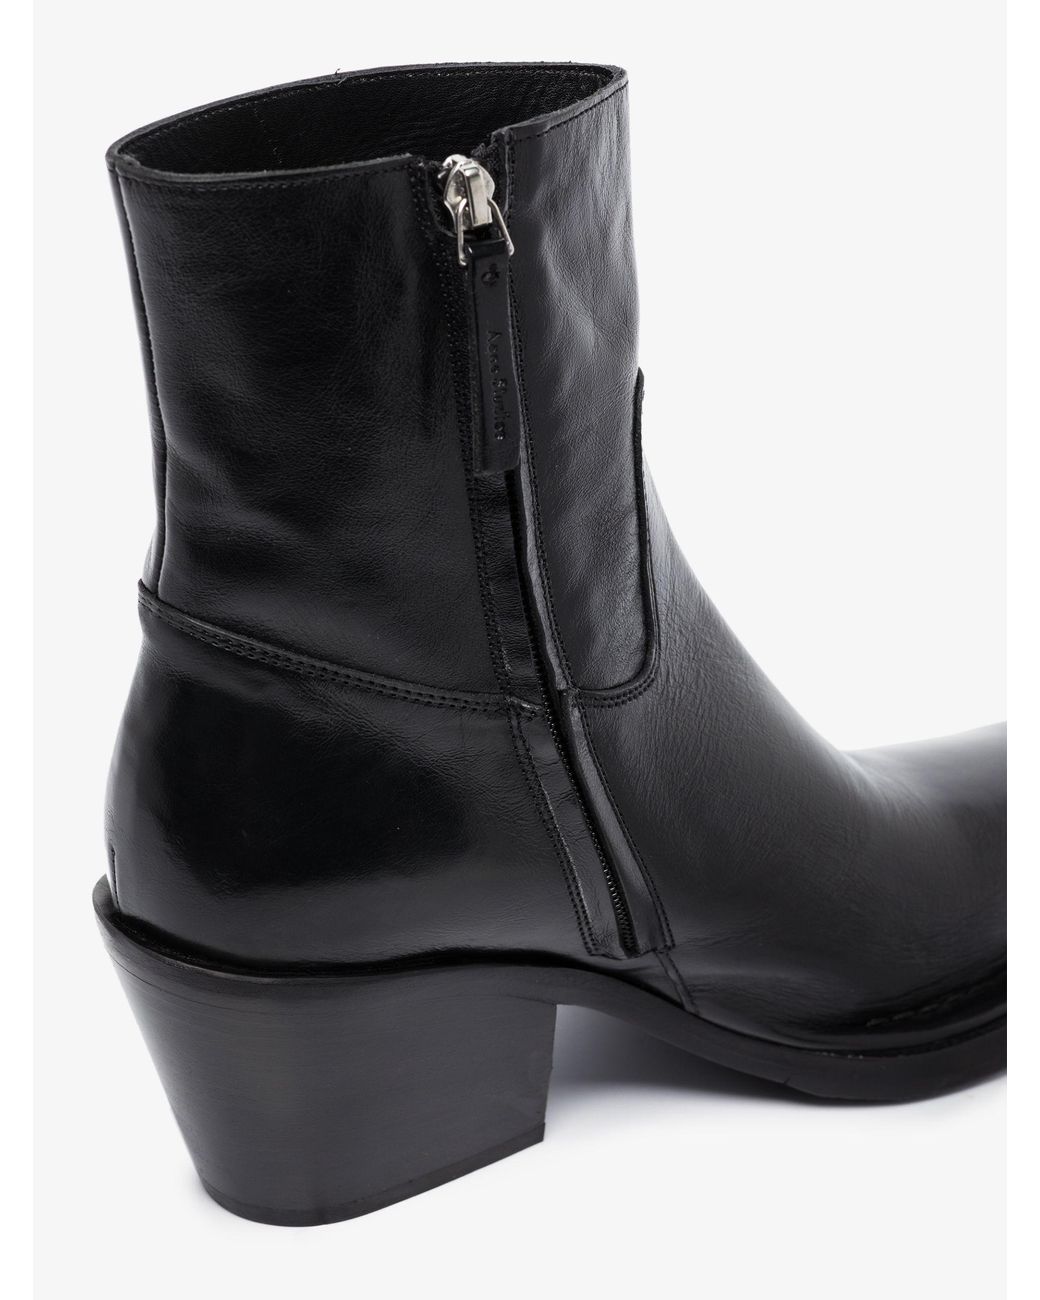 Acne Studios Bruna Leather Ankle Boots in Black | Lyst